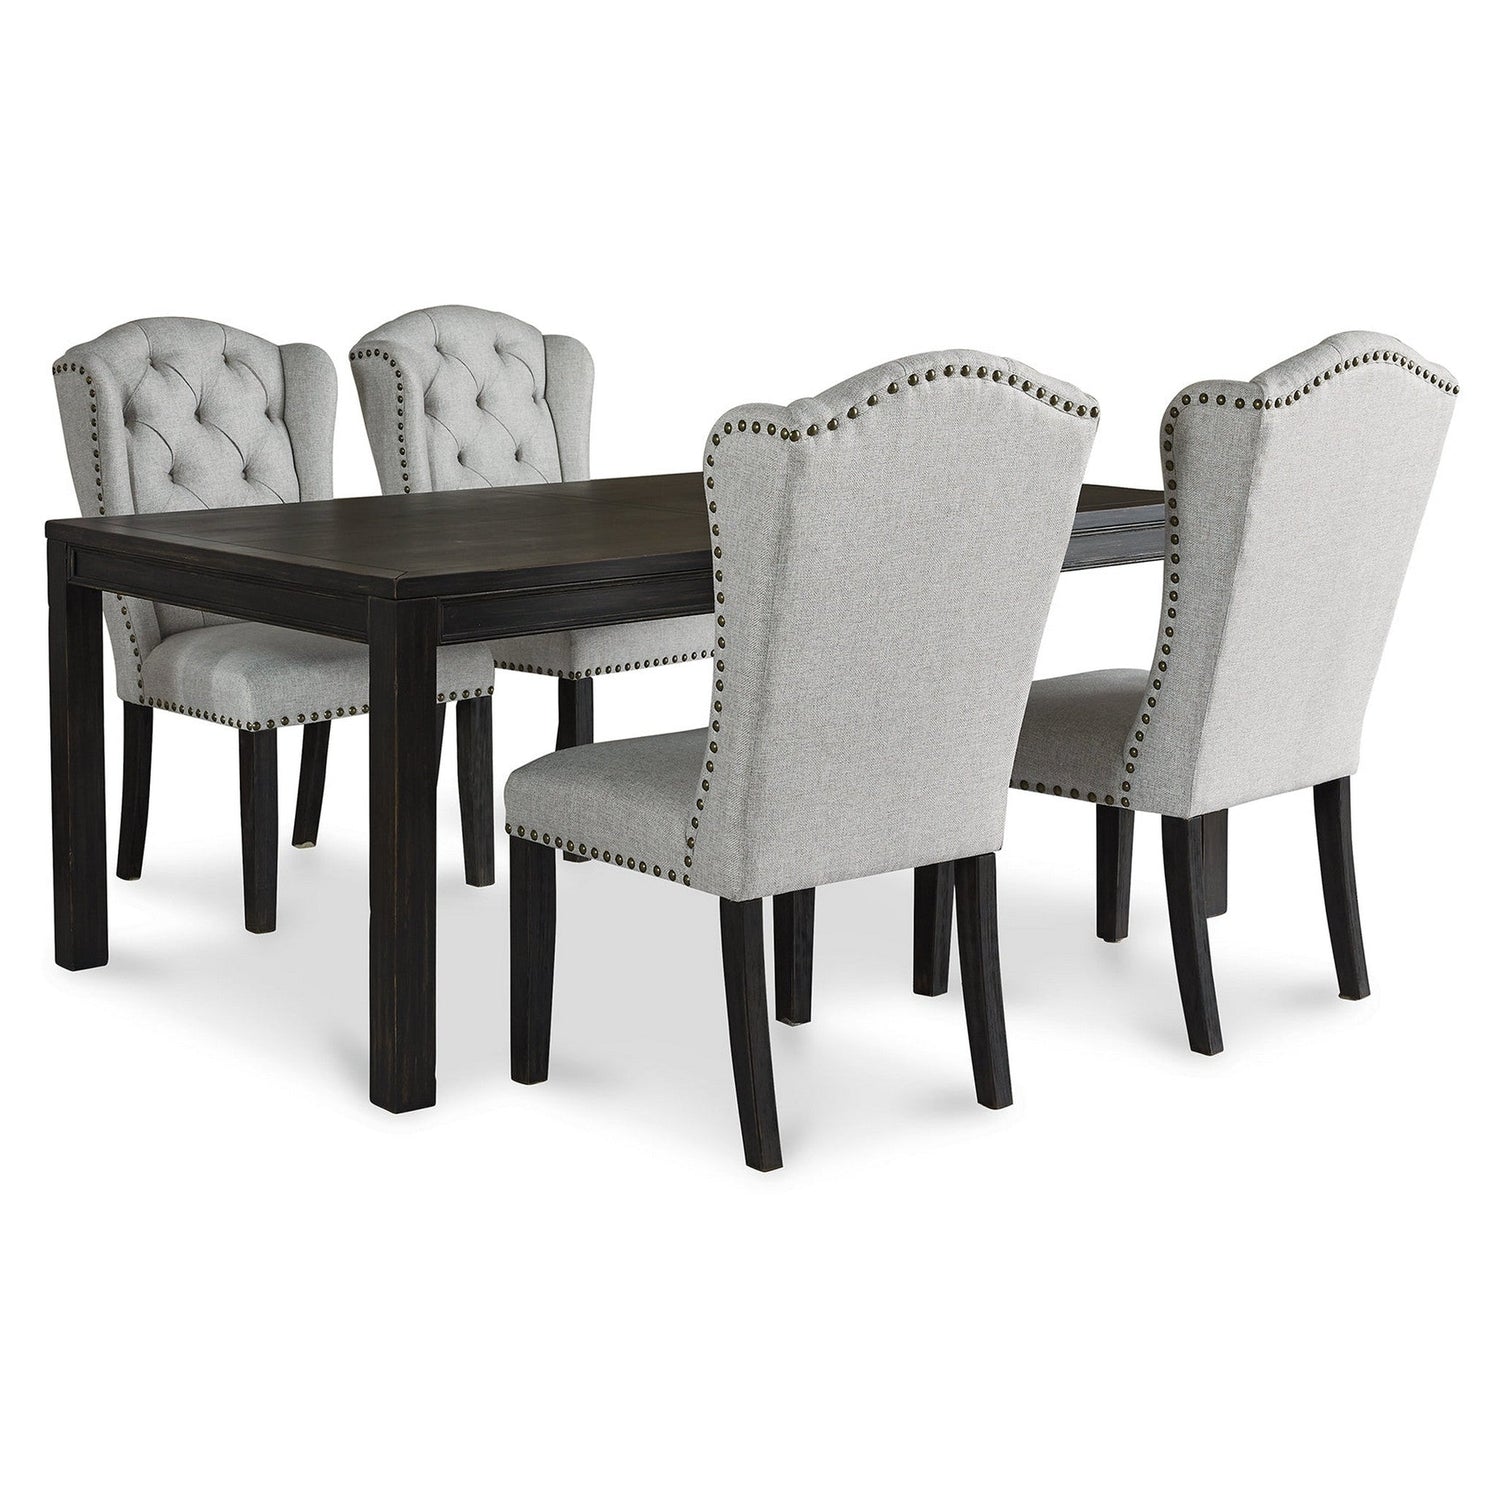 Jeanette Dining Table with 4 Chairs Ash-D702D1